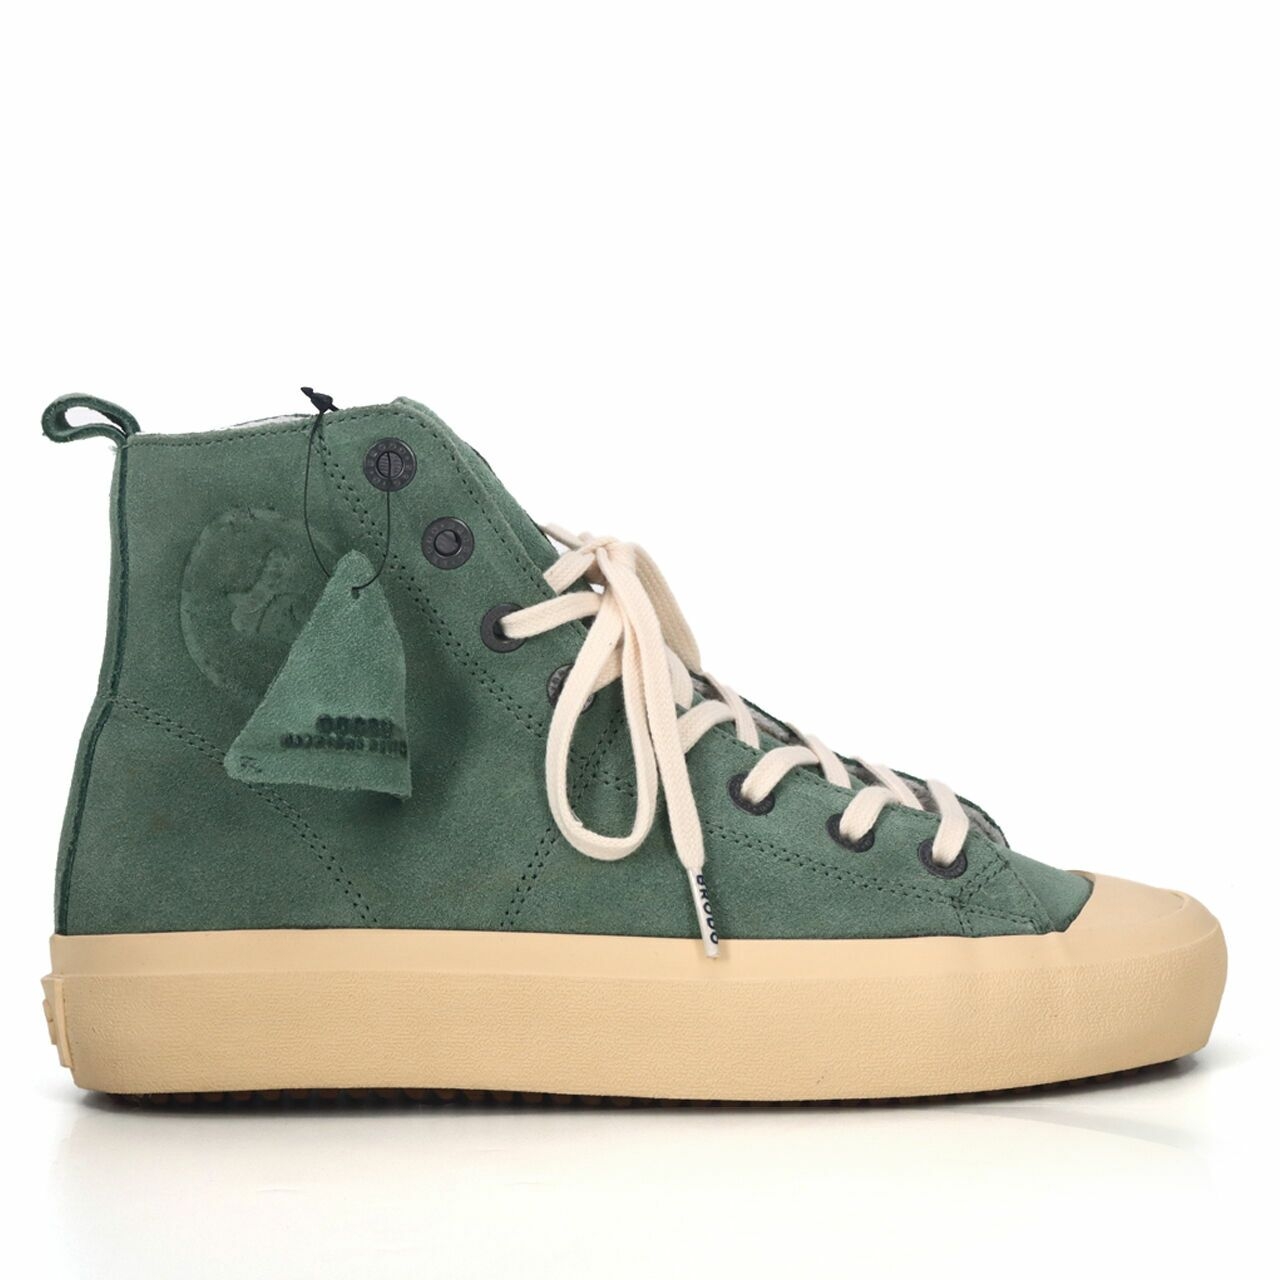 Brodo Wasabi VTG V.2 50 Shades Of Suede Sneakers